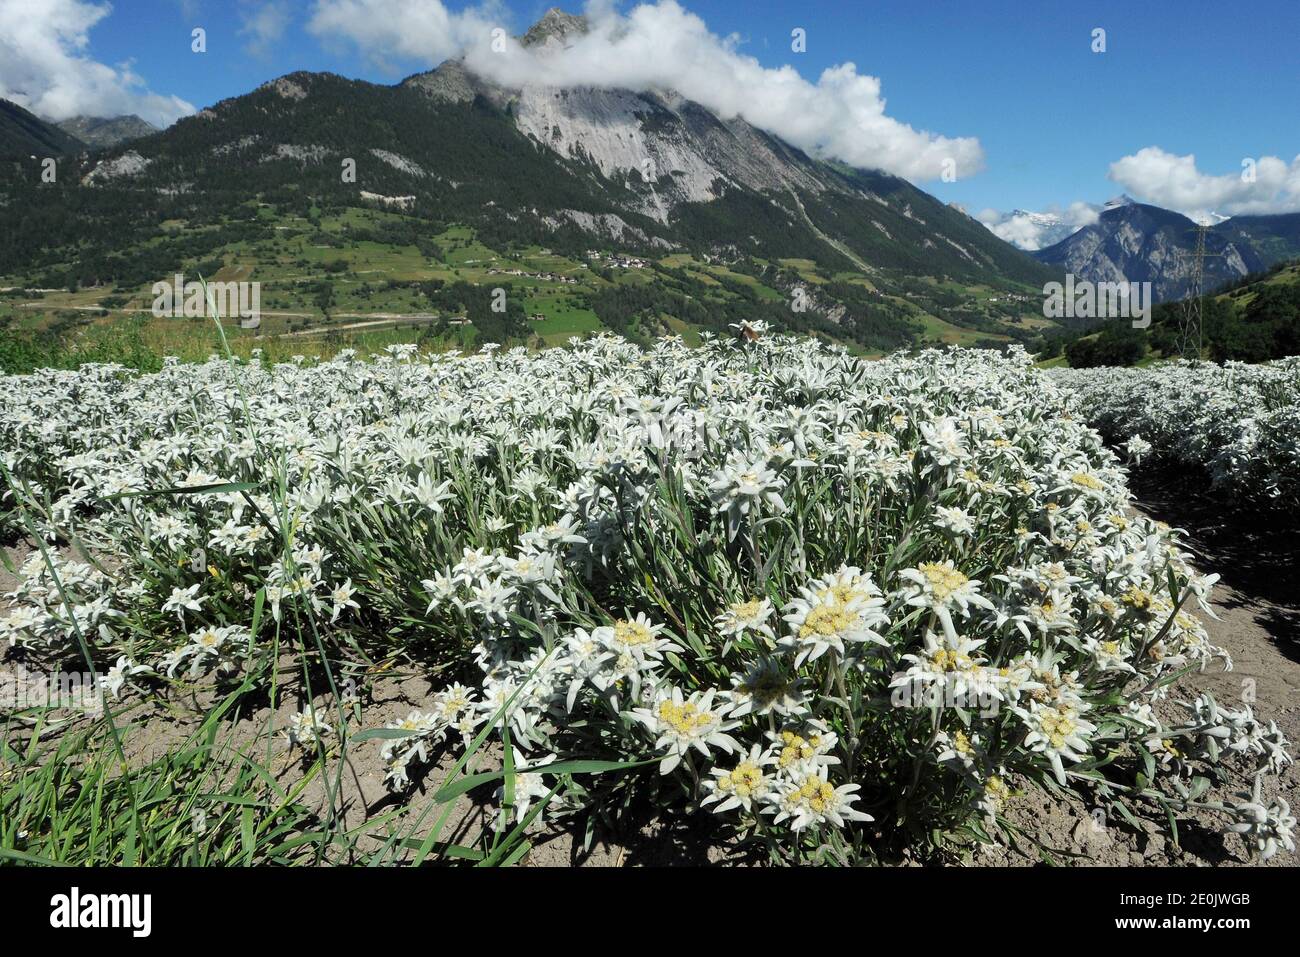 EXCLUSIVE. A view of the only edelweiss field existing in the Valais region during the harvest, in Orsieres, Switzerland on July 3, 2012. The field belongs to the Tornay family. Photo by Jean-Guy Python/ABACAPRESS.COM Stock Photo